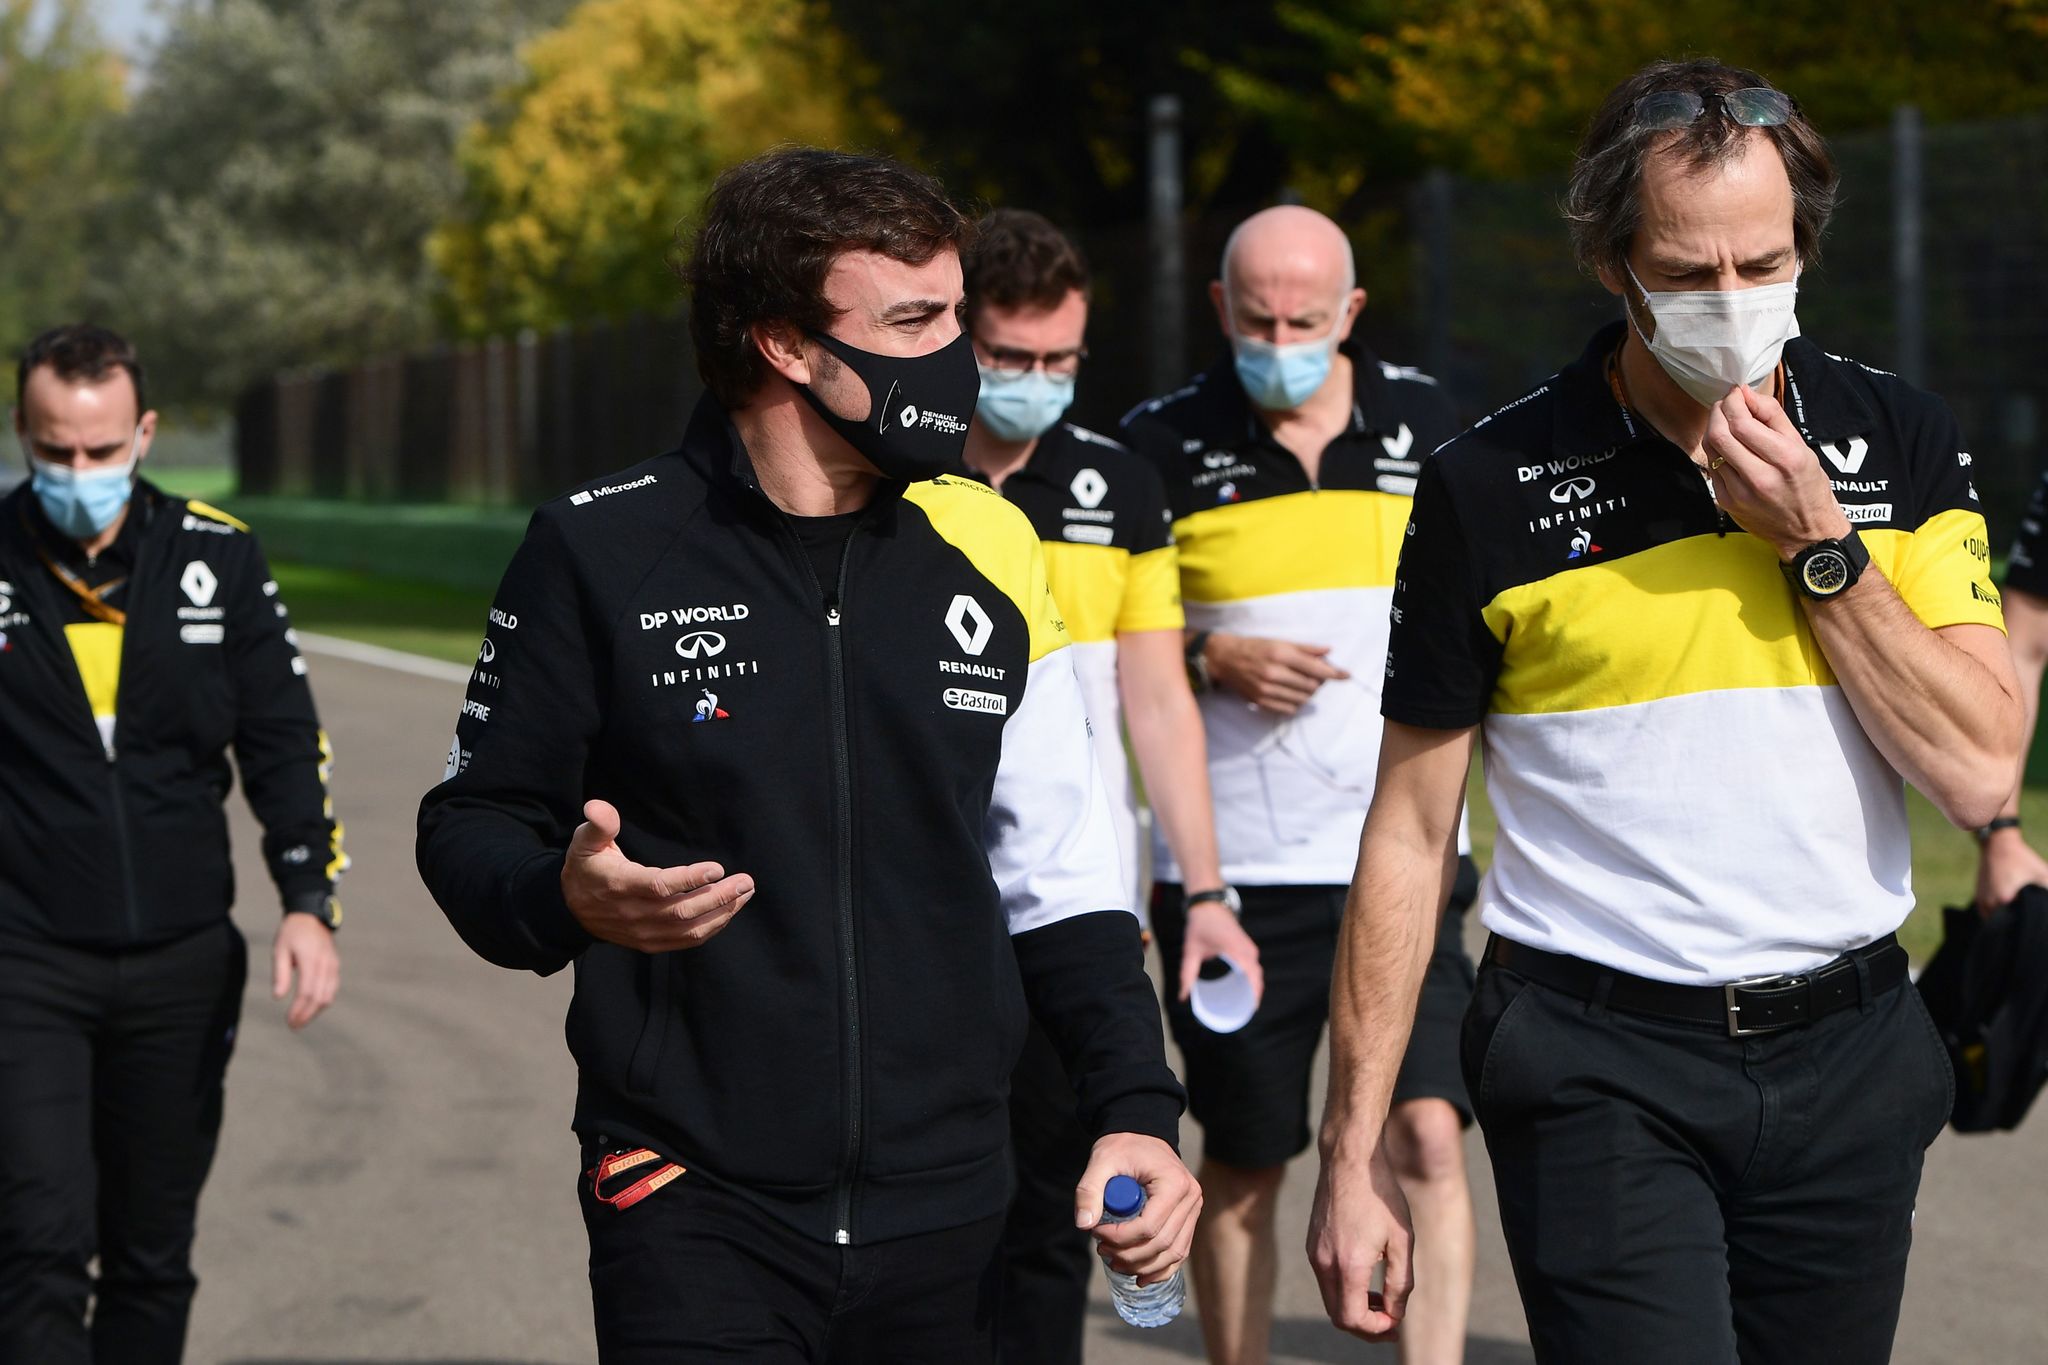 Renault's Spanish driver lt;HIT gt;Fernando lt;/HIT gt; lt;HIT gt;Alonso lt;/HIT gt; (C) inspects the Autodromo Internazionale Enzo e Dino Ferrari race track in Imola, Italy, on October 30, 2020, two days ahead of the Formula One Emilia Romagna Grand Prix. - lt;HIT gt;Fernando lt;/HIT gt; lt;HIT gt;Alonso lt;/HIT gt; will step up his preparations for a return to Formula One next year with a two-day test in Bahrain next week, his Renault team said on October 30. (Photo by Miguel MEDINA / AFP)